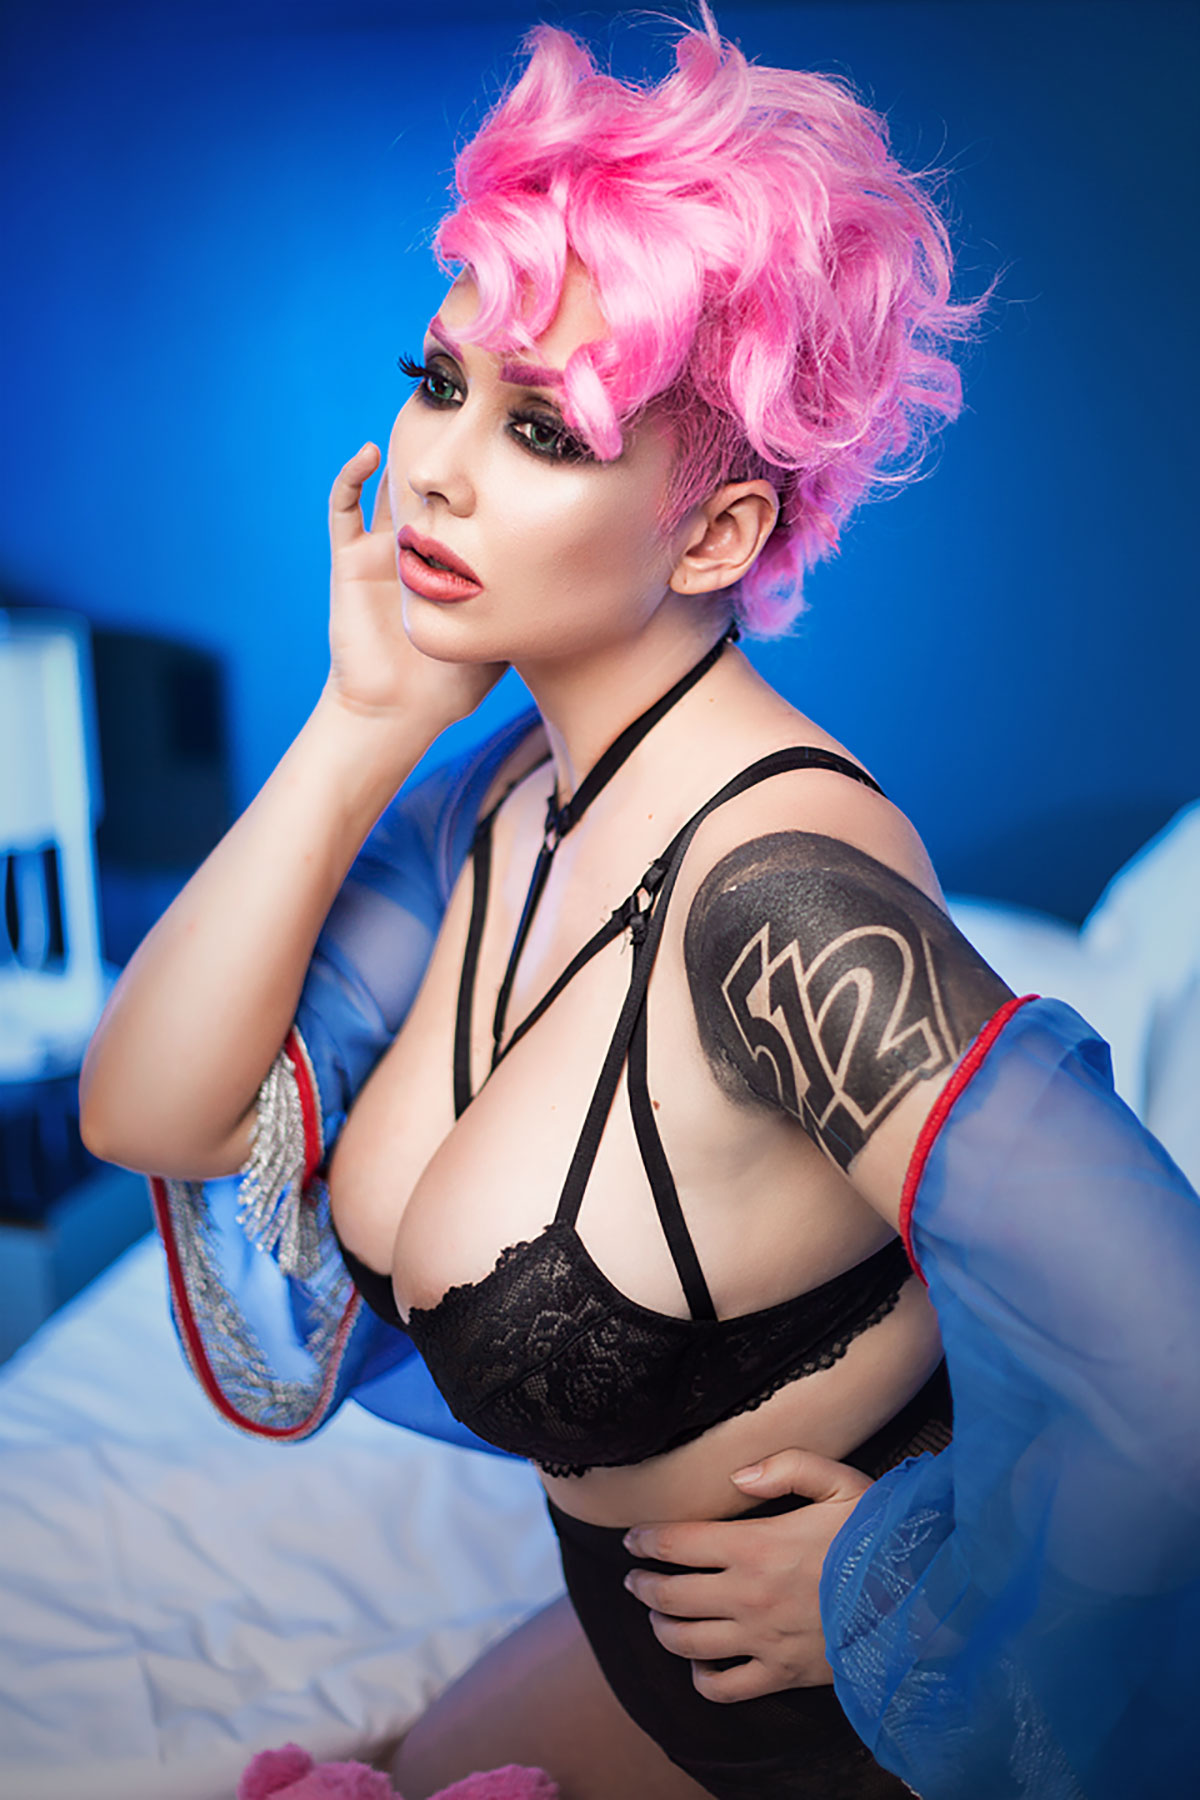 NSFW Overwatch Cosplay Was The Star Of The Show